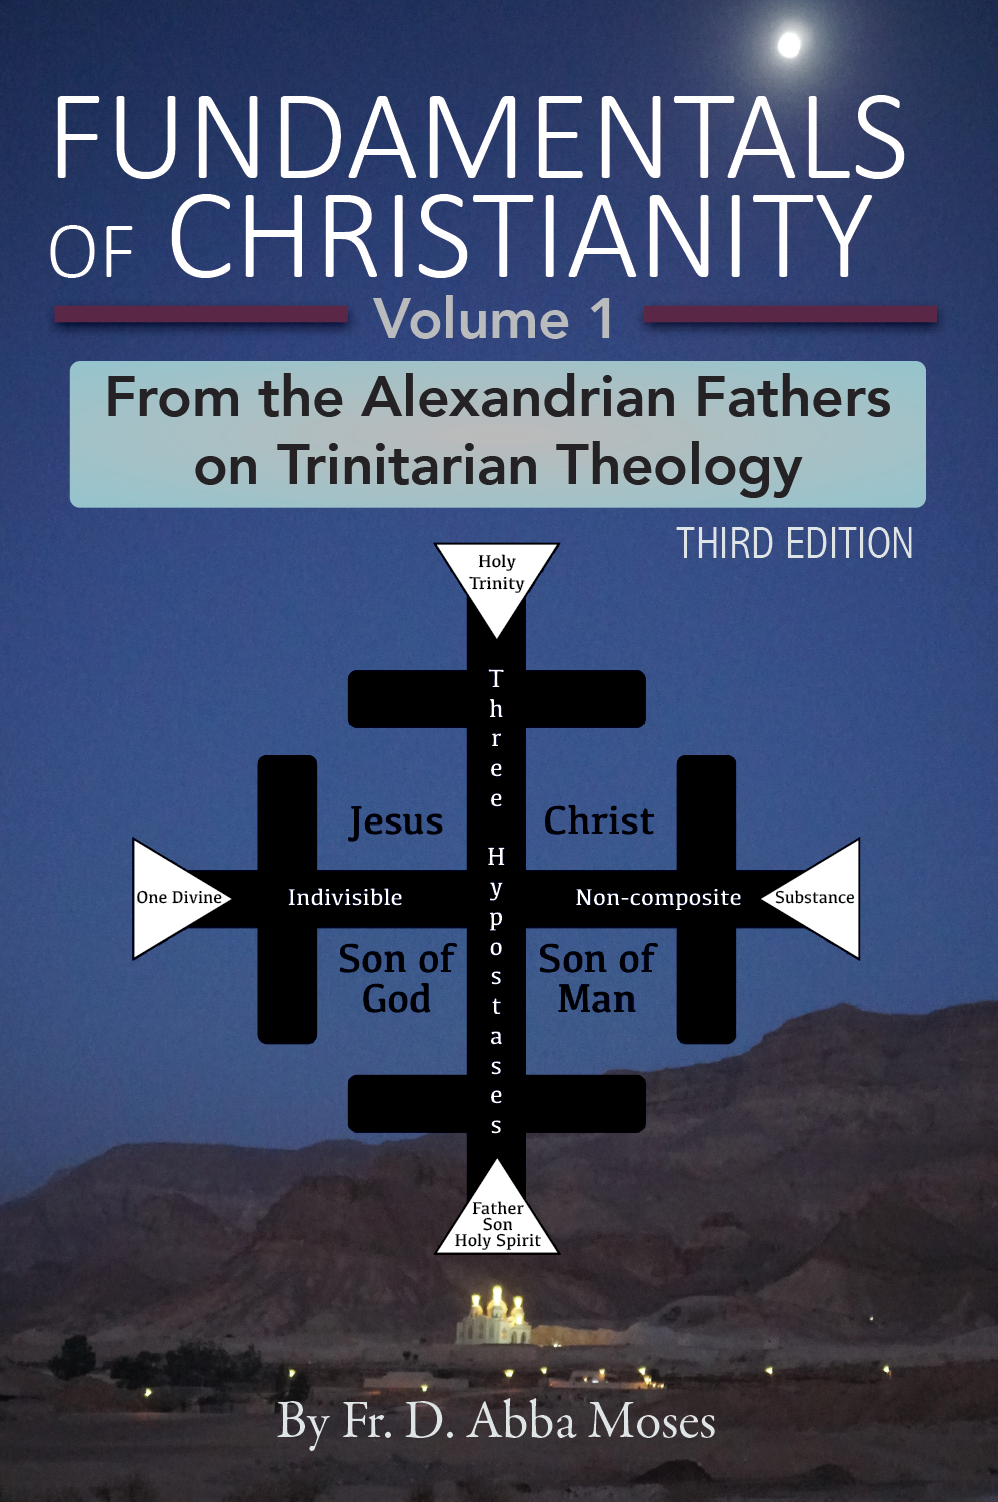 Fundamentals of Christianity Volume 1: From the Alexandrian Fathers on Trinitarian Theology Coptic